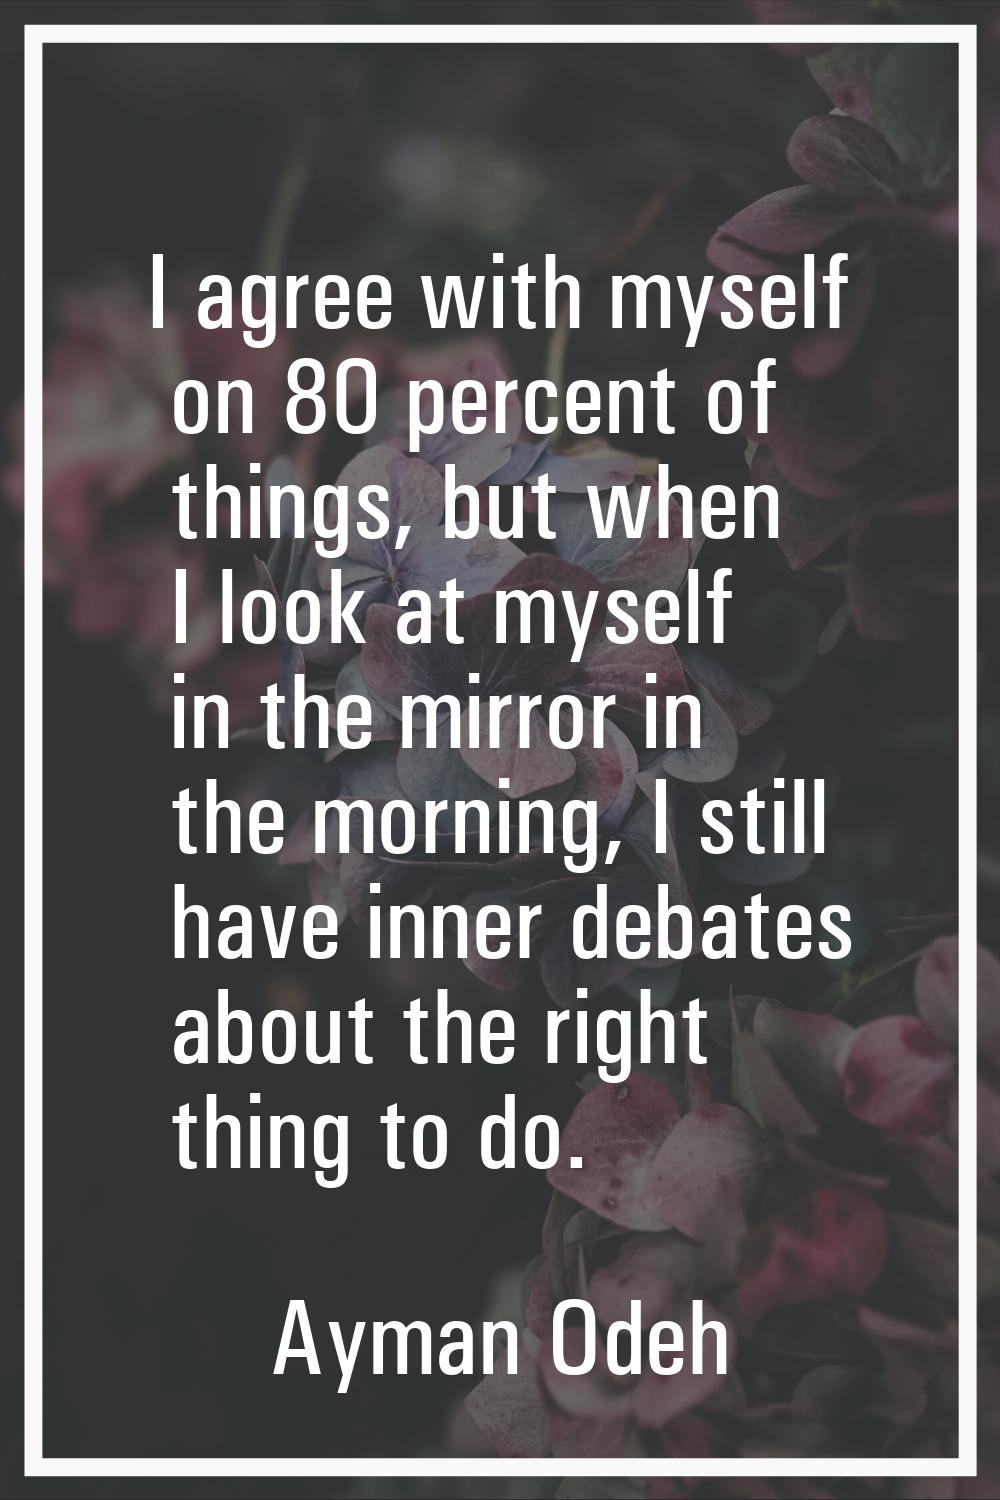 I agree with myself on 80 percent of things, but when I look at myself in the mirror in the morning